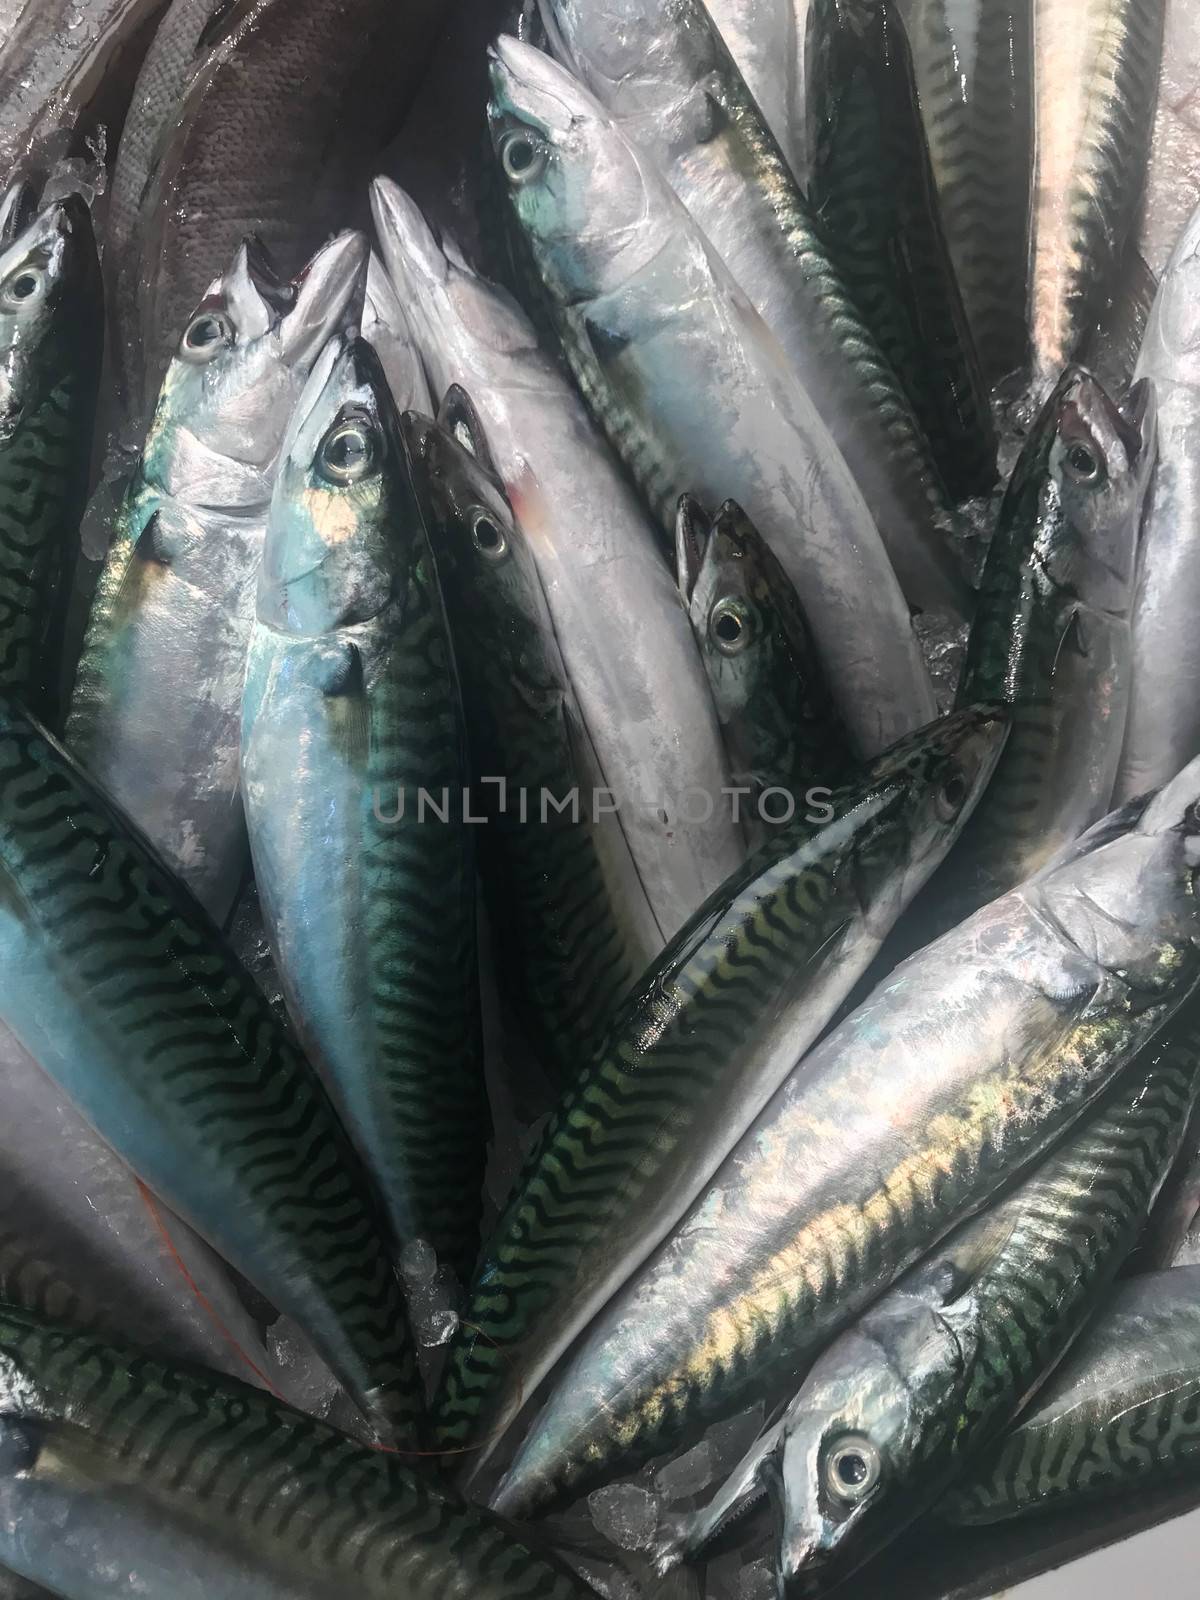 Some mackerels for sale in a fish shop